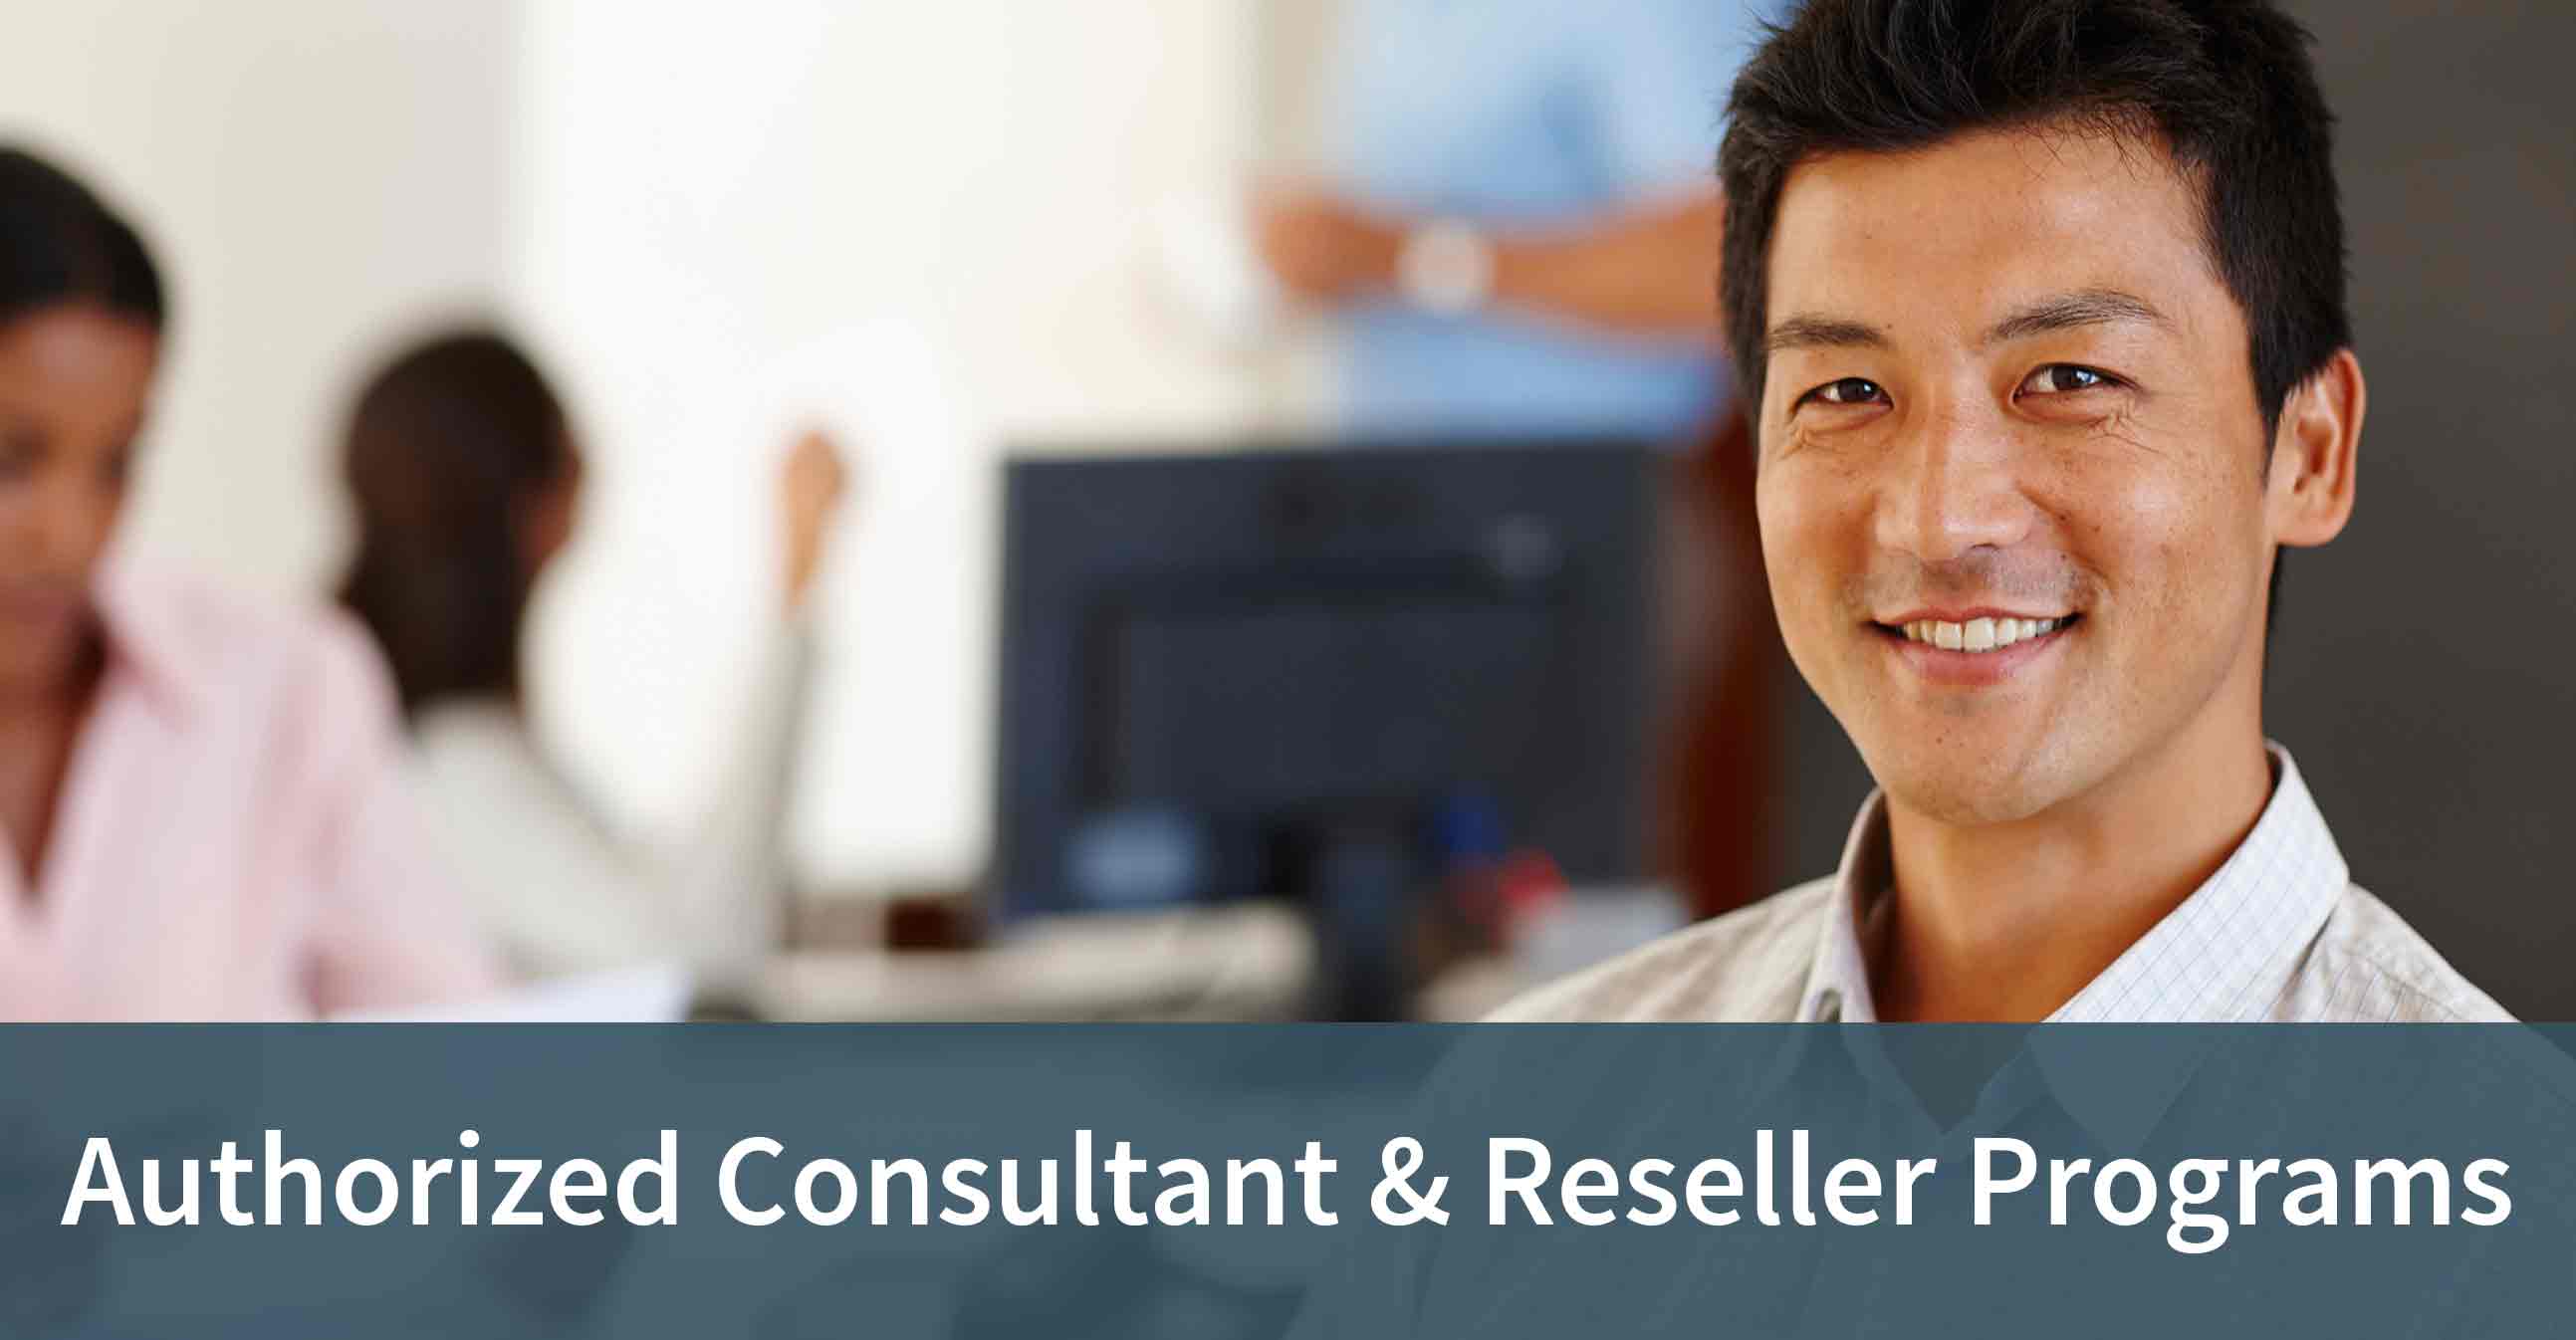 Authorized Consultant & Reseller Programs